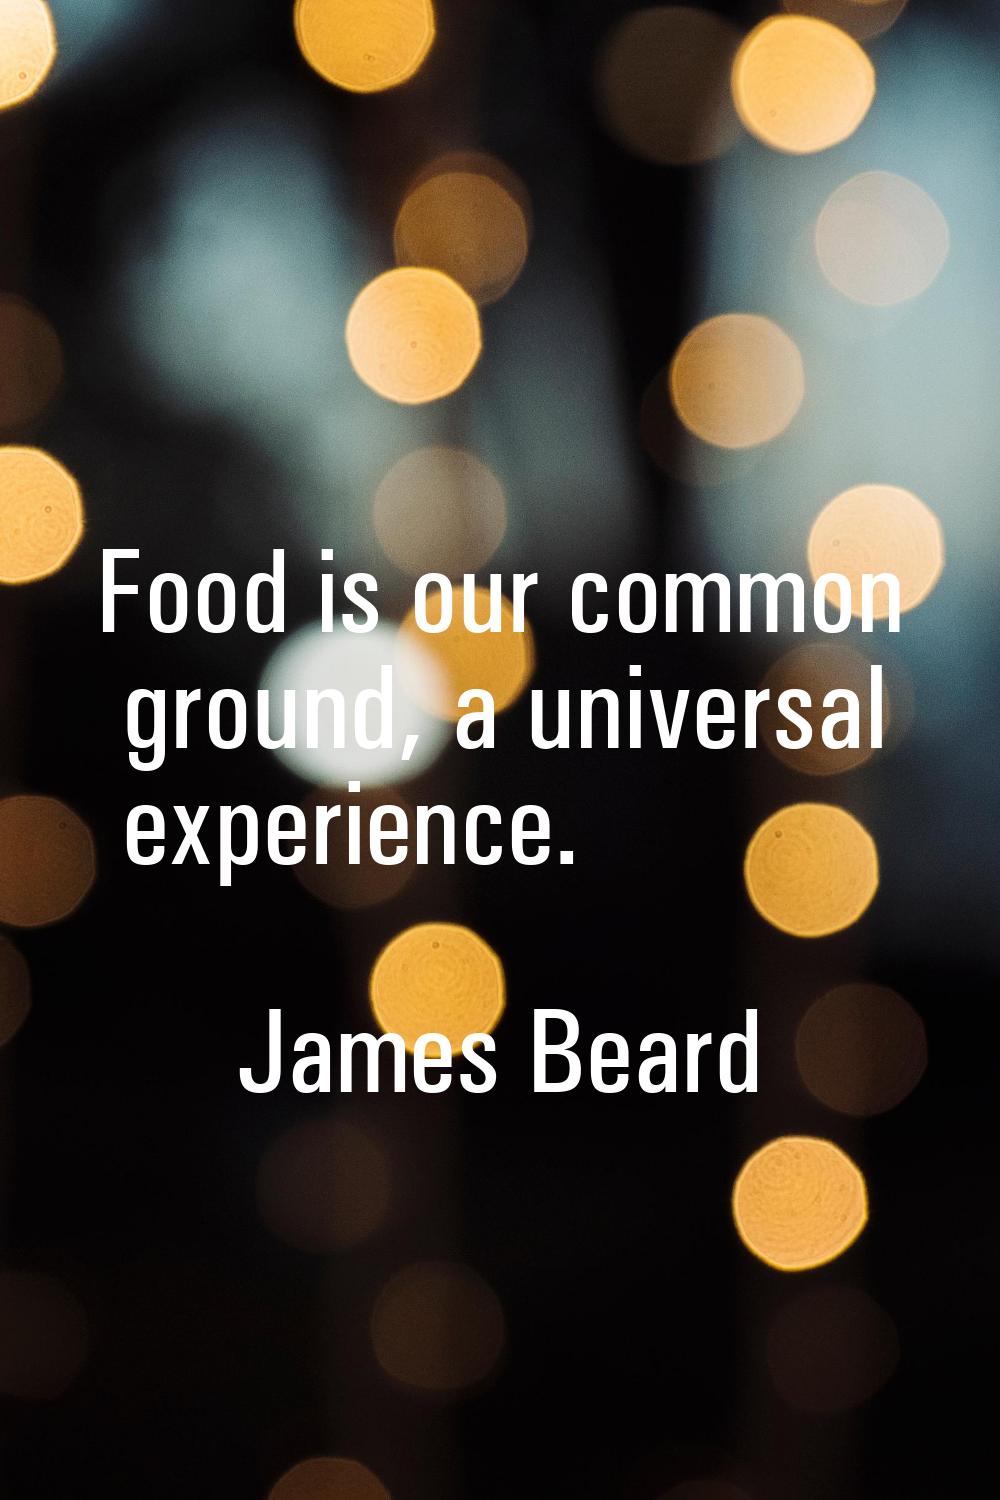 Food is our common ground, a universal experience.